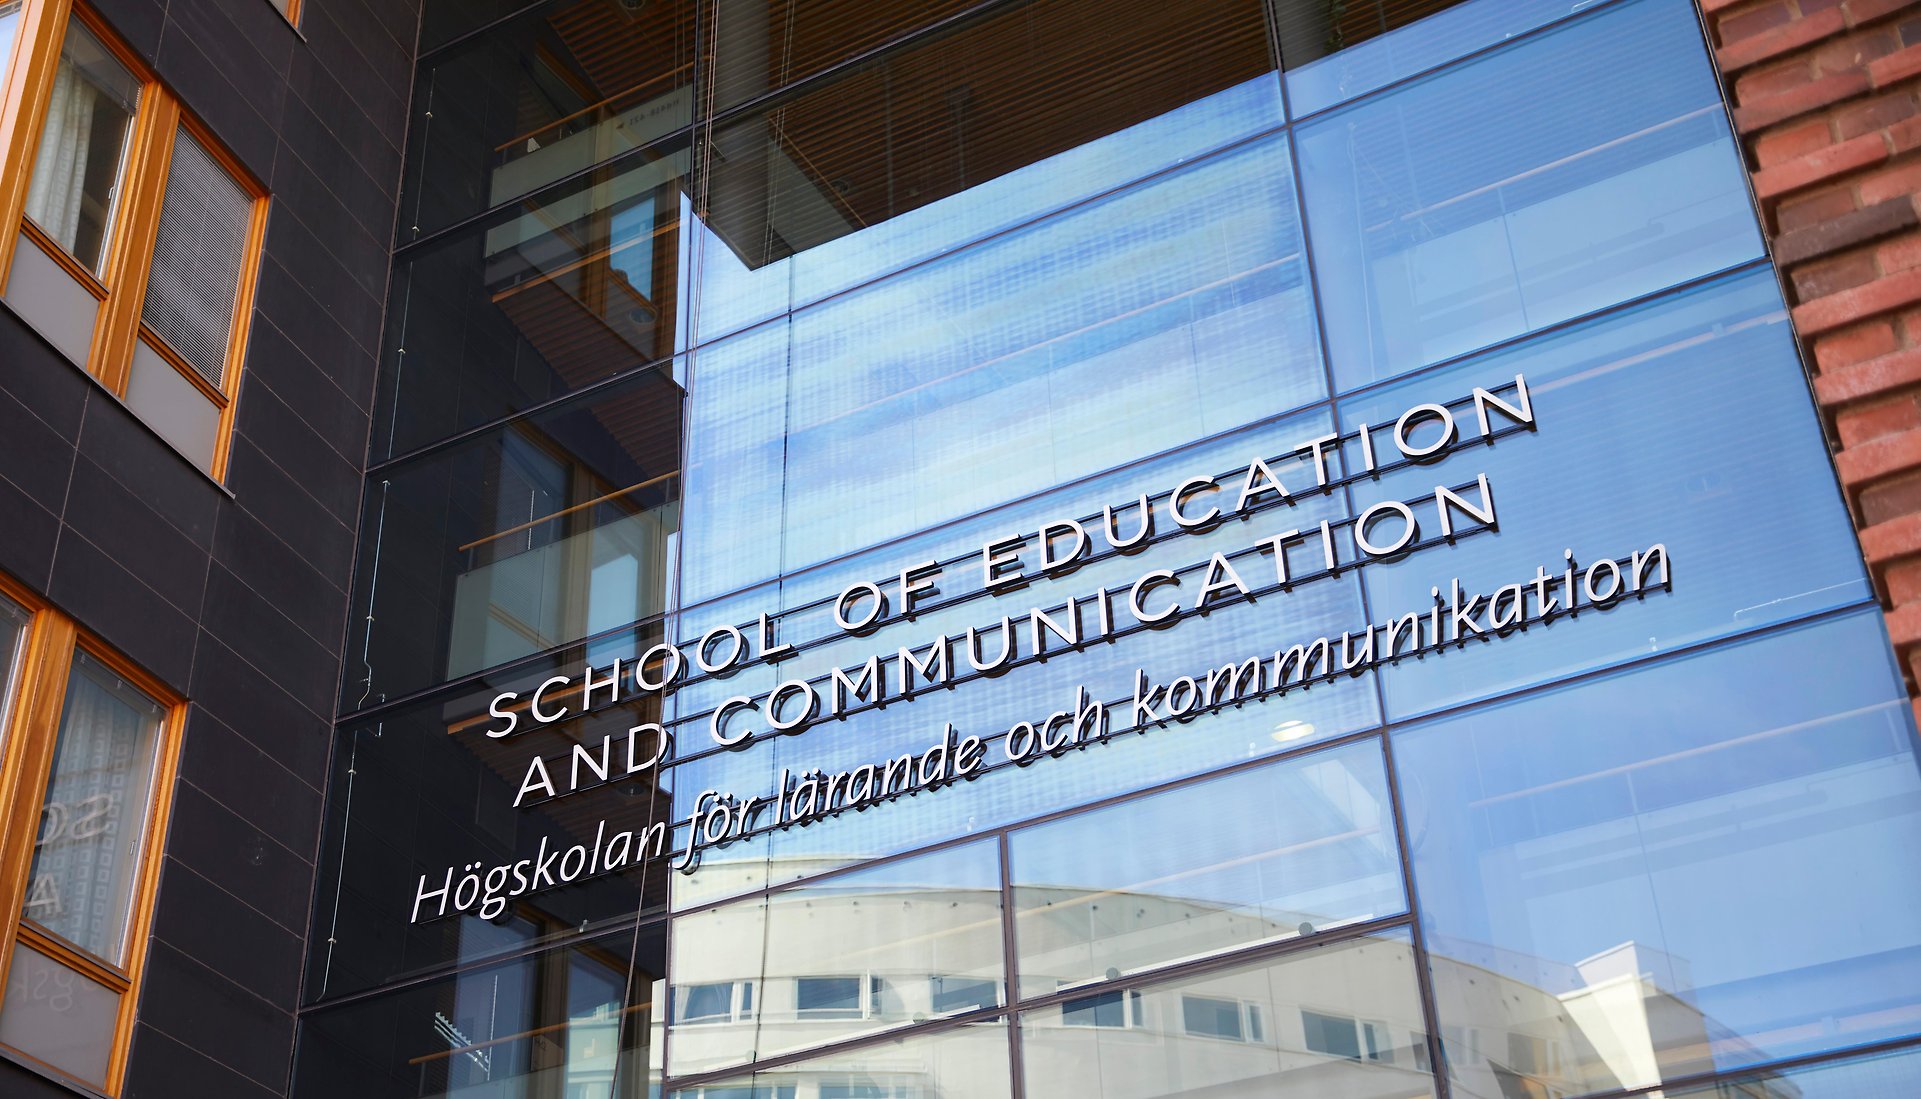 The sign over the entrance to the School of Education and Communication 